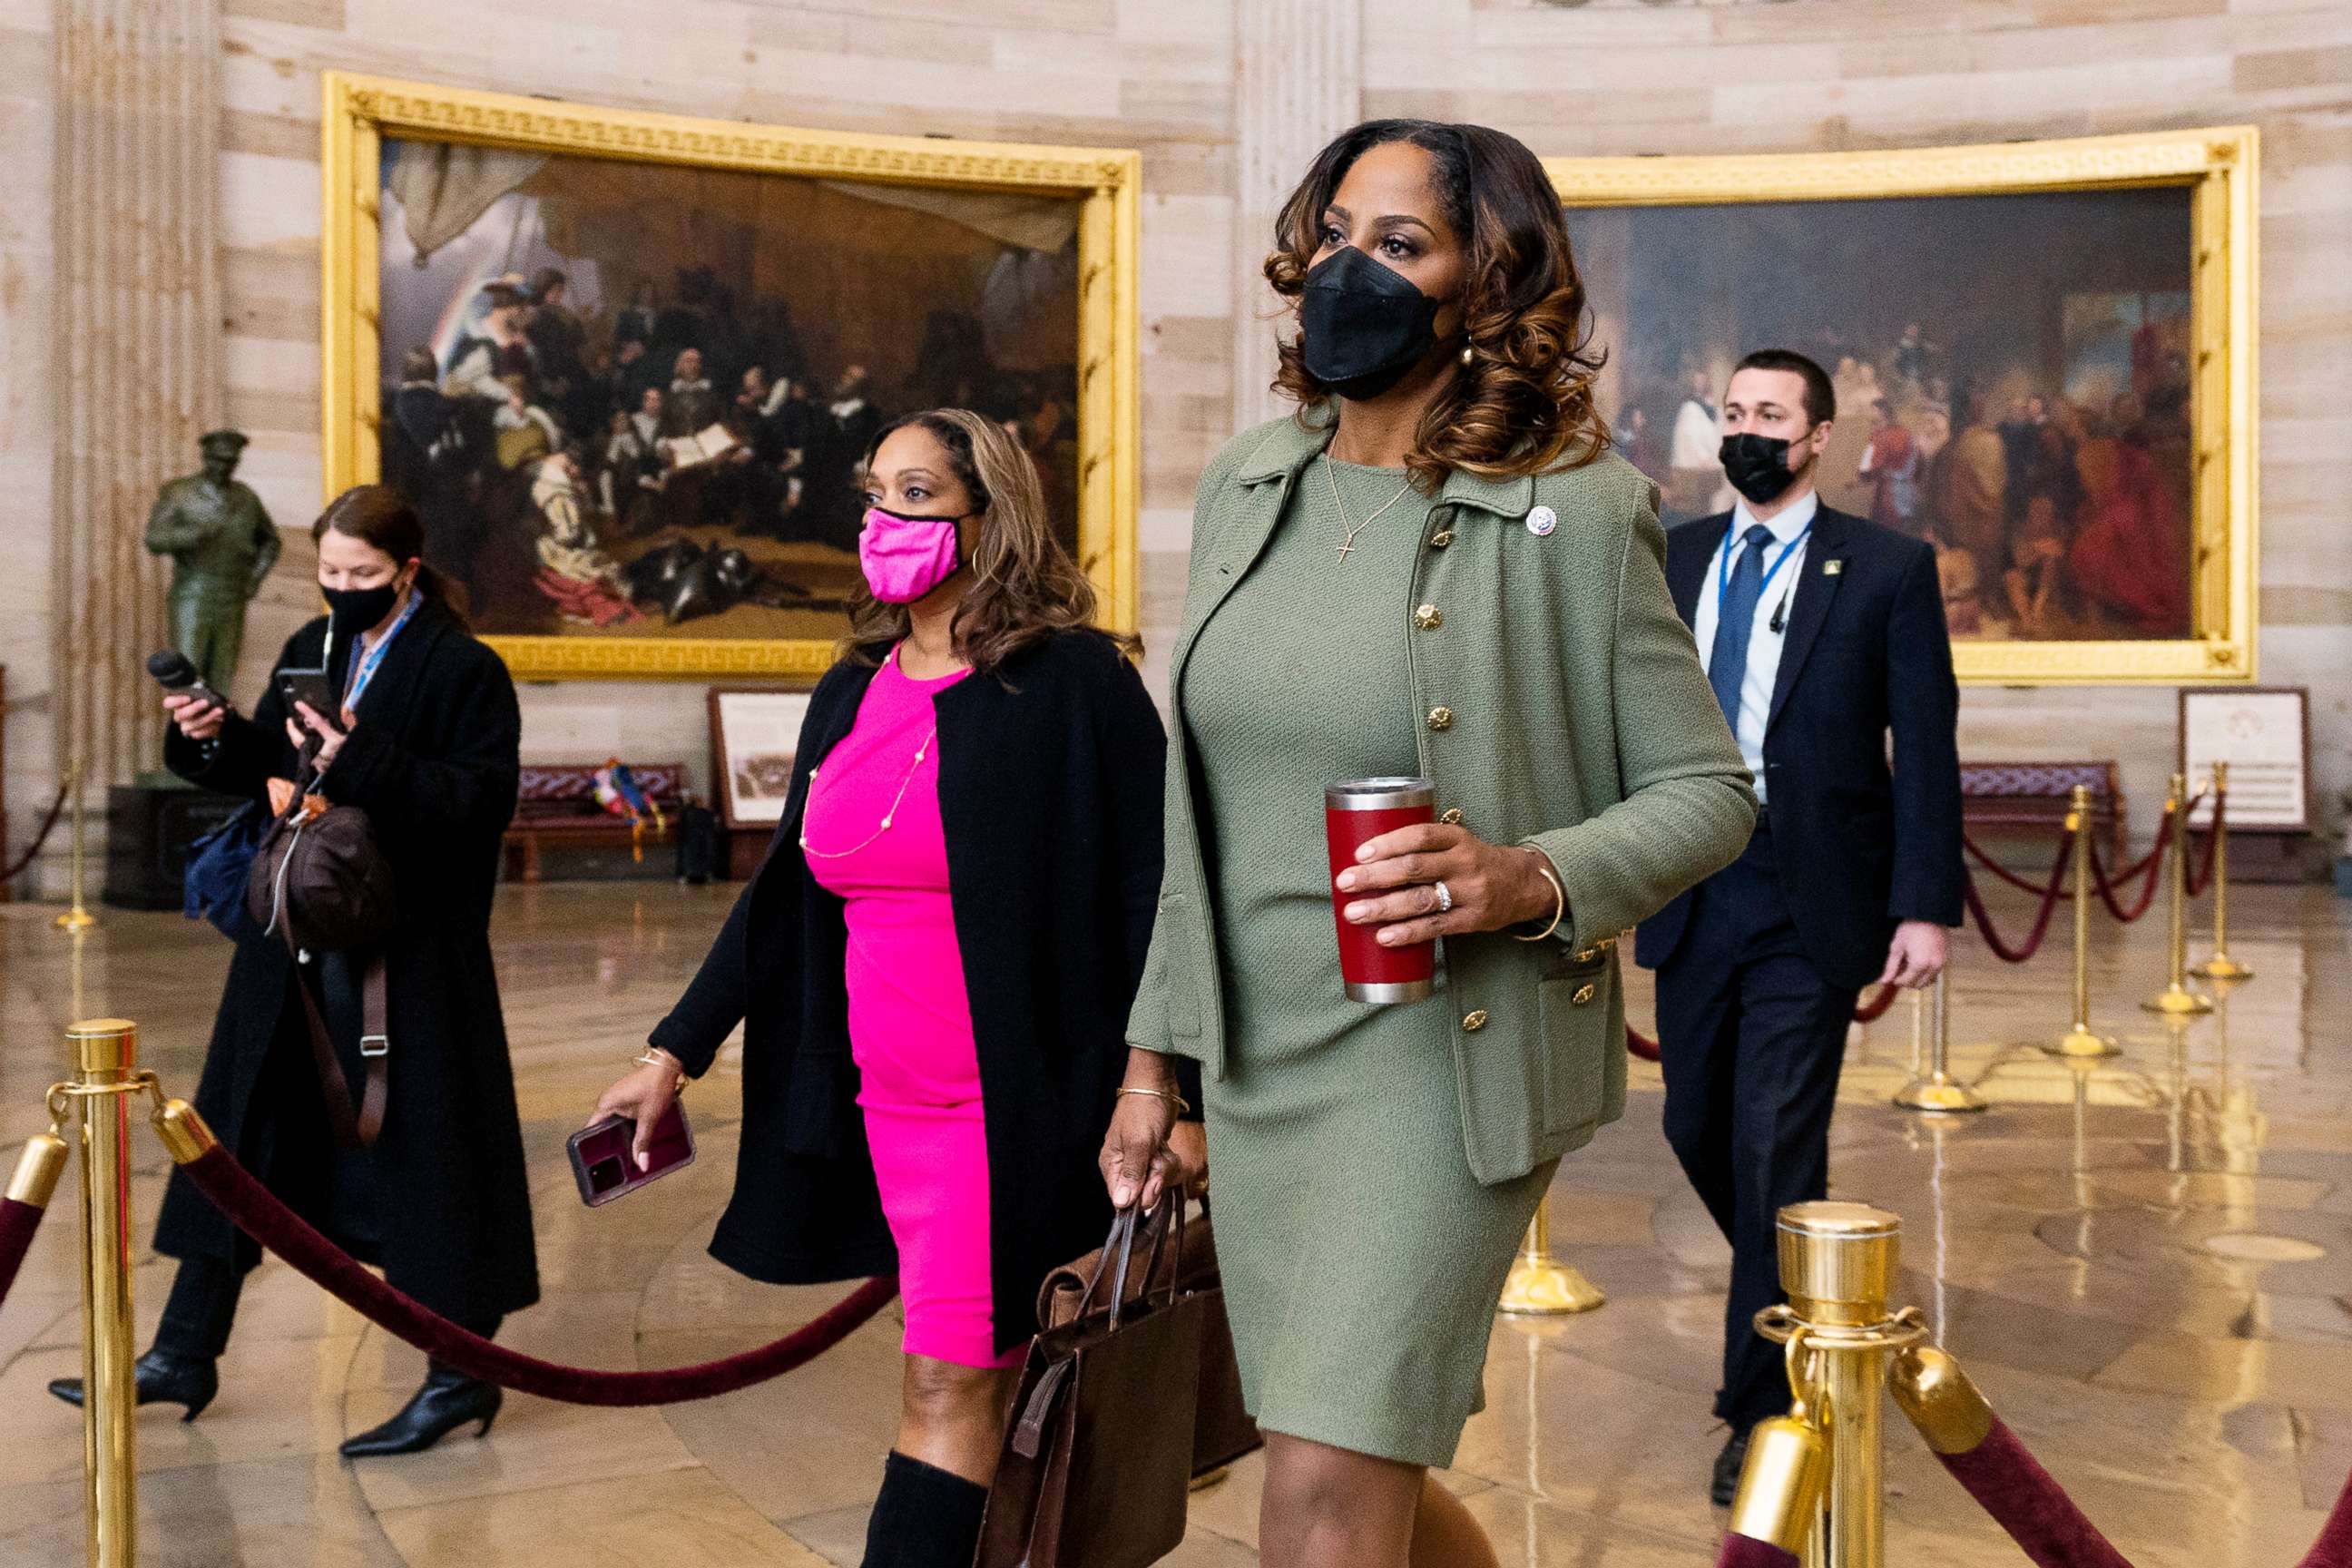 PHOTO: House impeachment manager Delegate Stacey Plaskett, walks through the Capitol Rotunda to the Senate on the fifth day of the second impeachment trial of former President Donald Trump, Feb. 13, 2021.